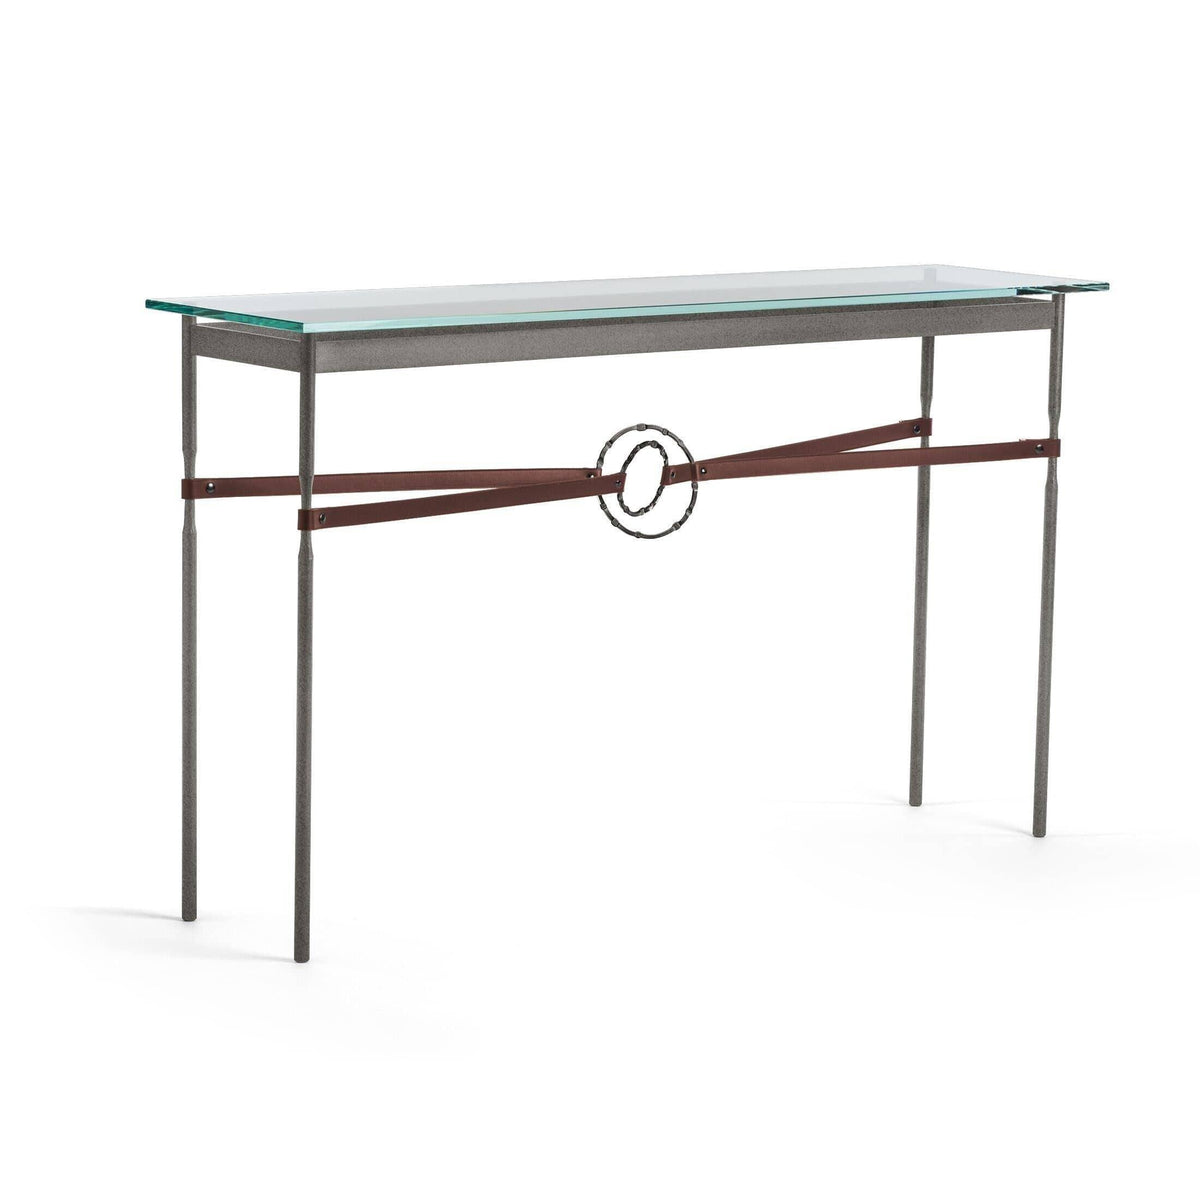 Hubbardton Forge - Equus Brown Leather Console Table - 750118-20-07-LB-VA0714 | Montreal Lighting & Hardware